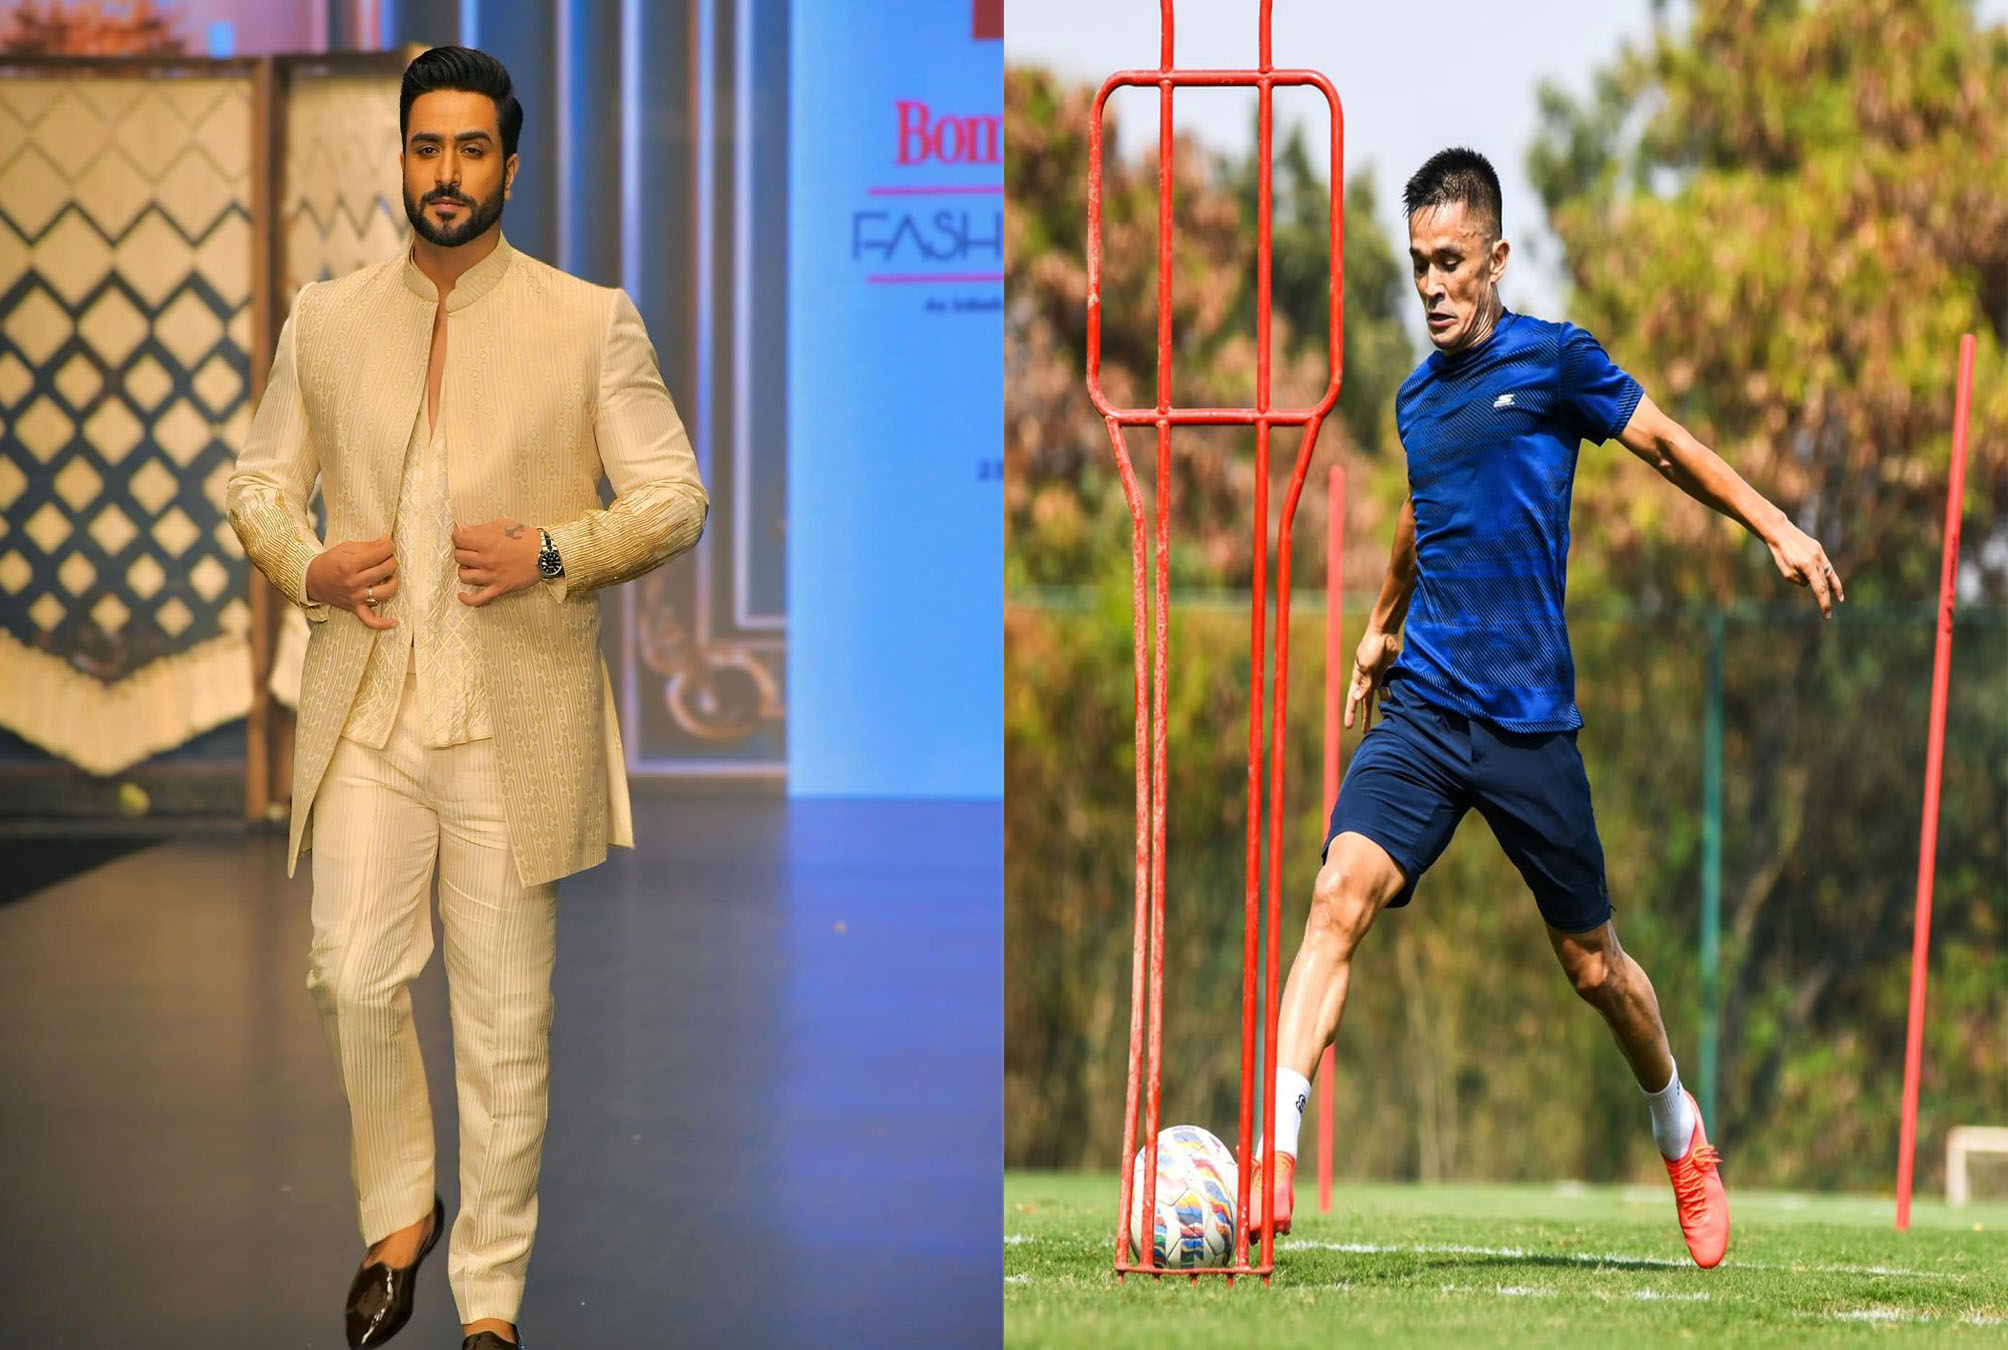 How Does Sports Enthusiast Actor Aly Goni React To Sunil Chhetri’s Retirement? Read On!